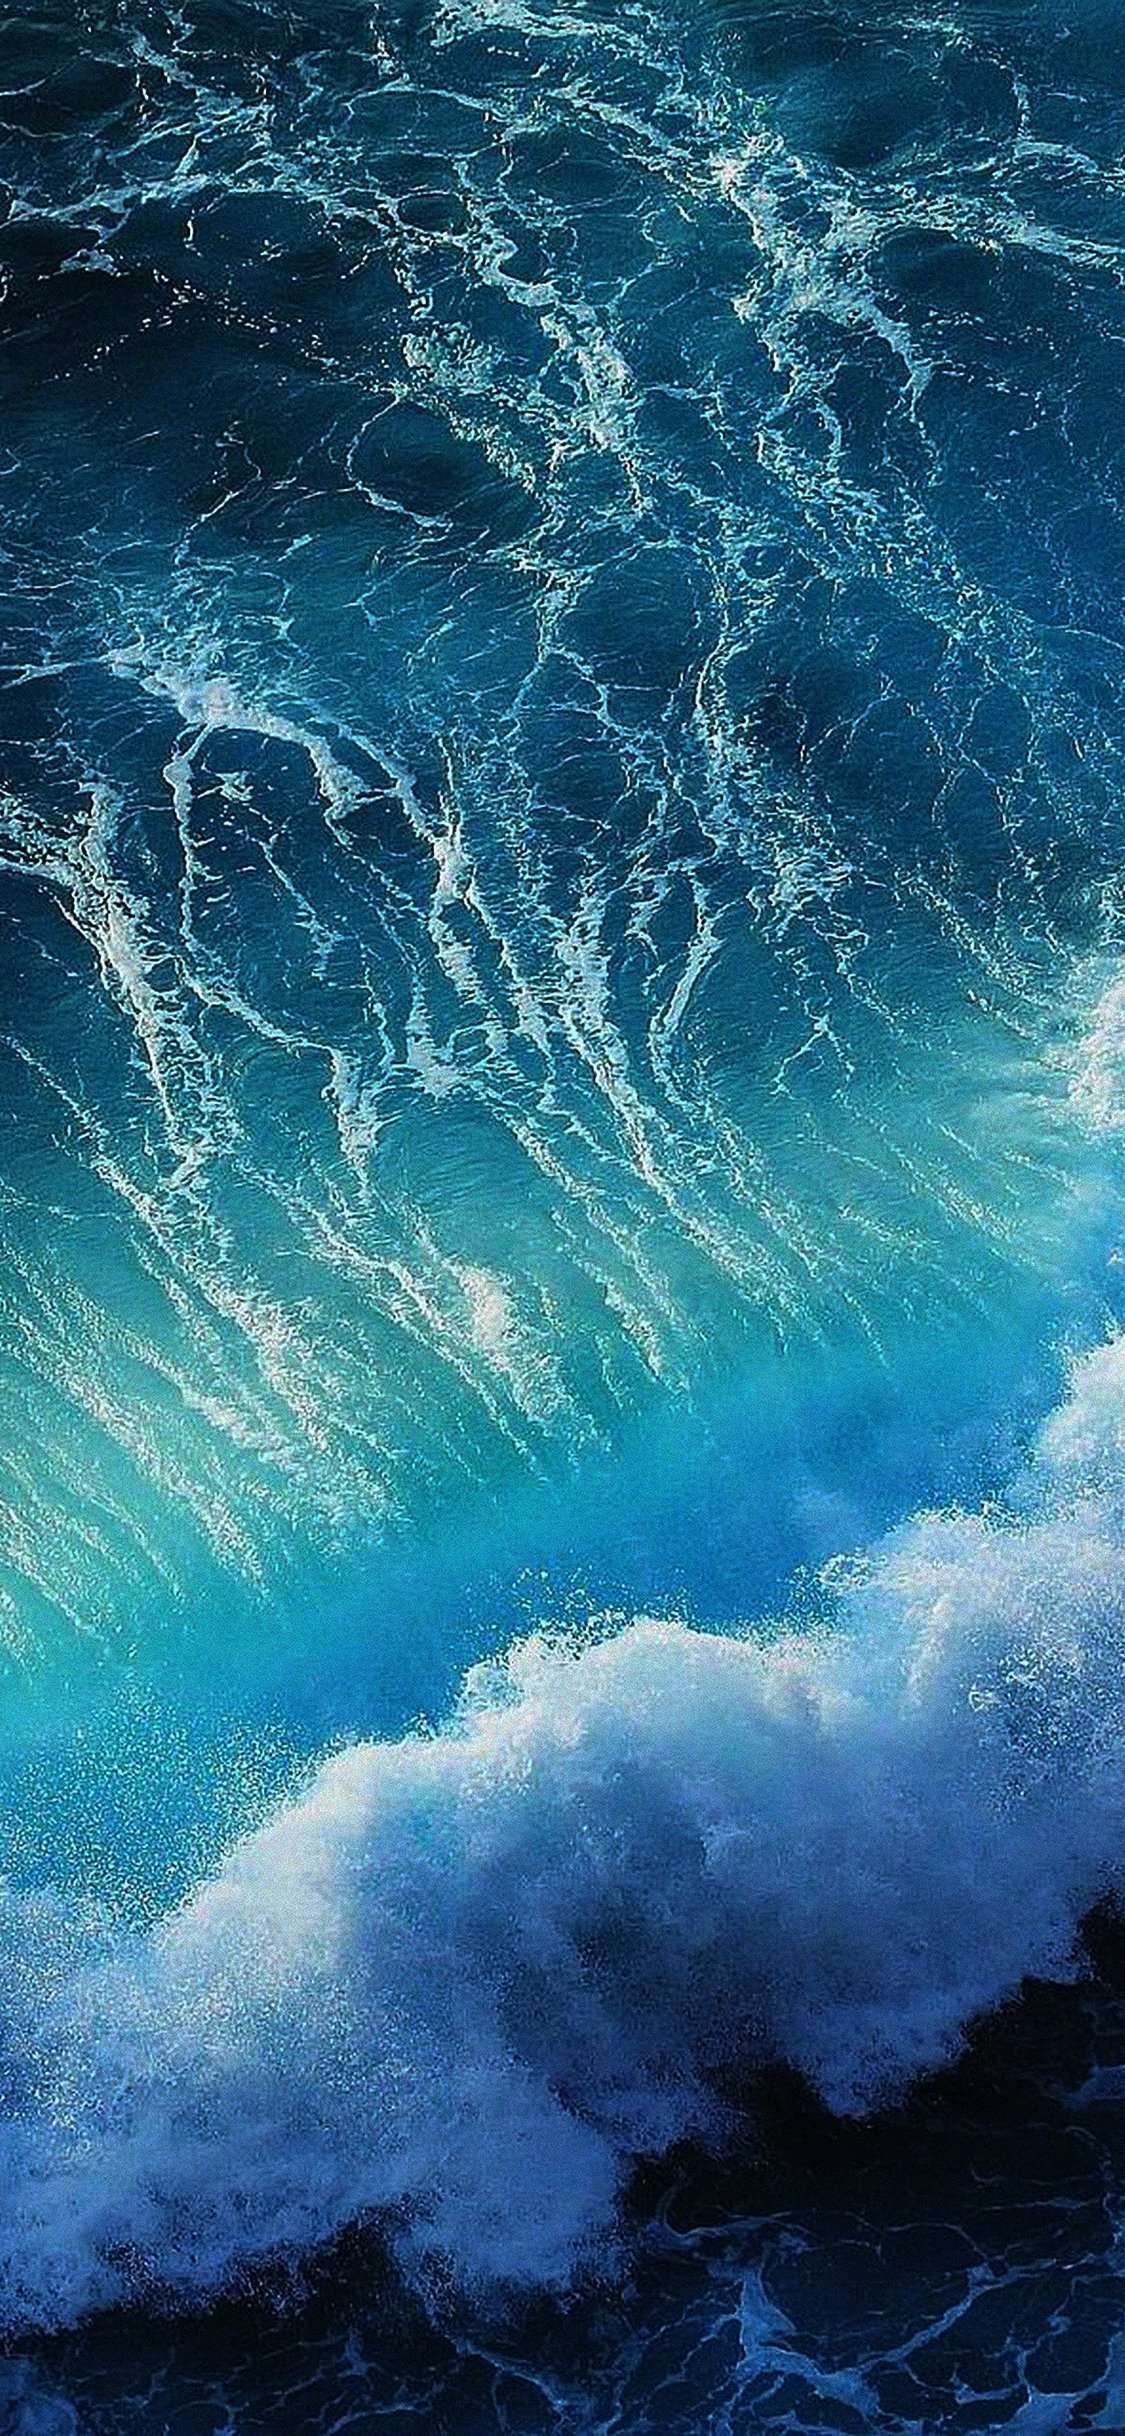 Arranged for iPhone X, Beautiful Wallpaper, Background. FunMary. 34 amazing wallpaper for iPhone x, iphone wallpaper, iphon. Ocean wallpaper, Ocean waves, Waves